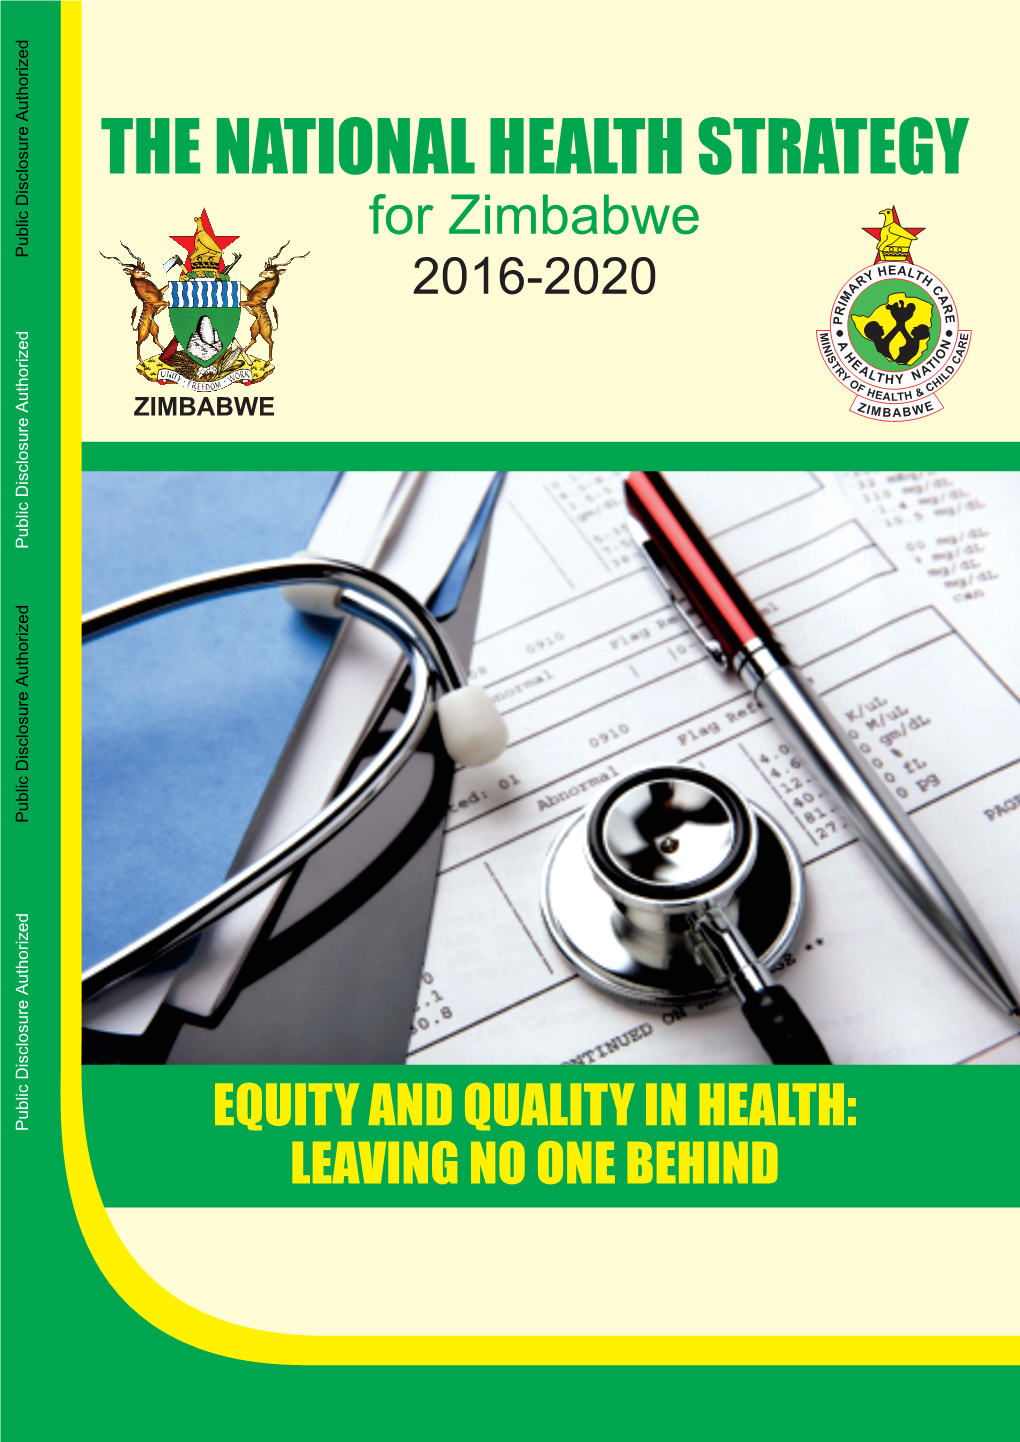 National Health Strategy for Zimbabwe 2016-2020FINAL.Qxp Layout 1 14/12/2016 10:08 Page 1